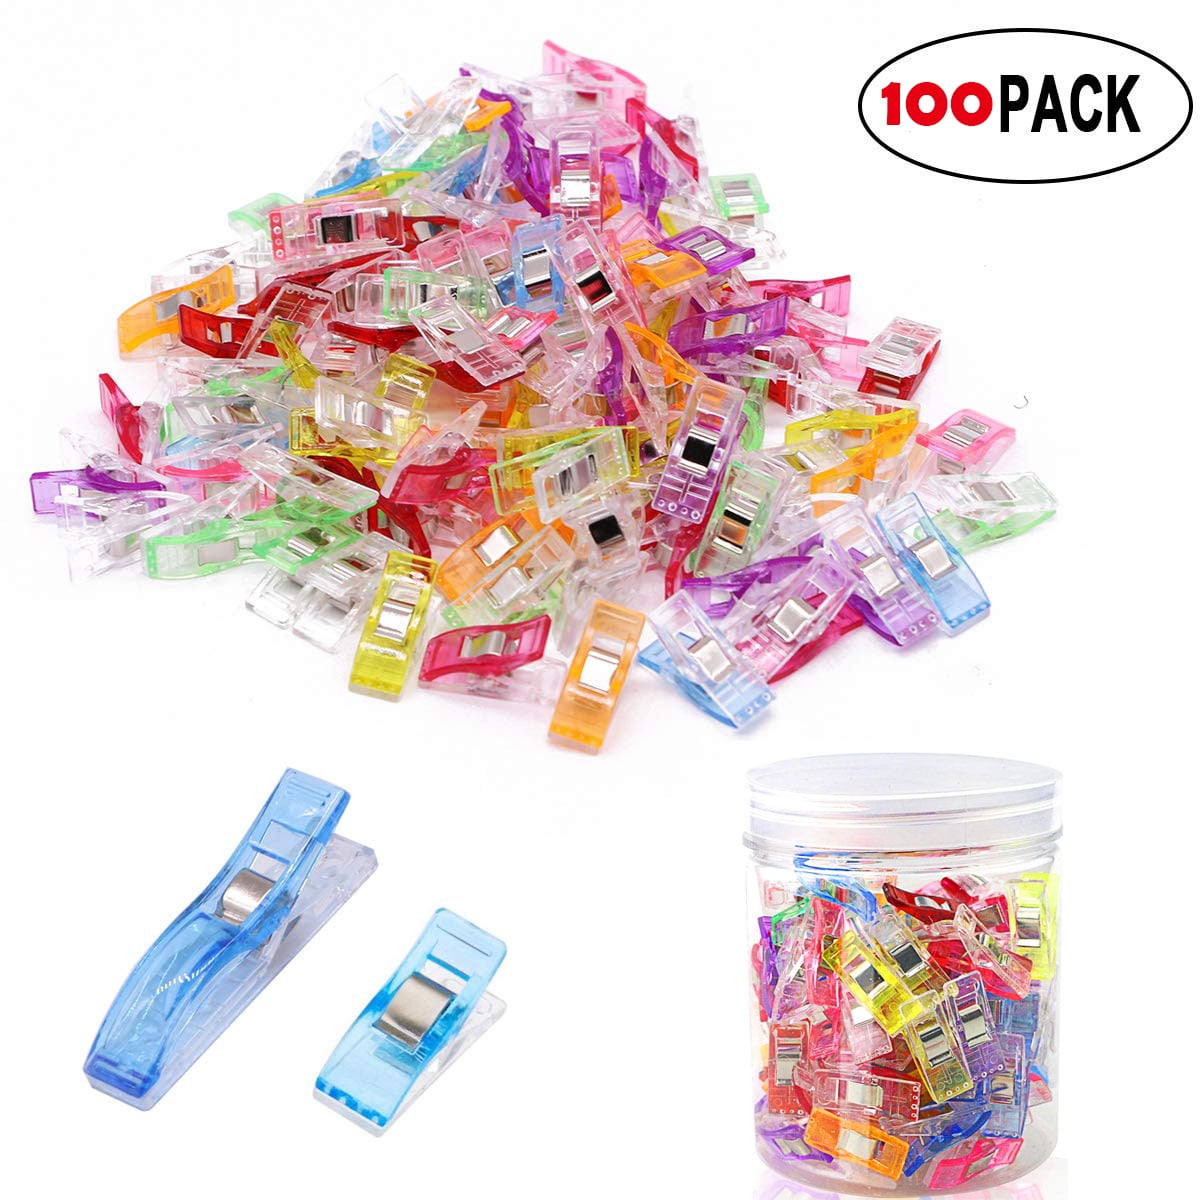 100PCS Colorful Craft Sewing Clips for Quilting, Multipurpose Sewing  Accessories Wonder Clips 10 Large 90 Small